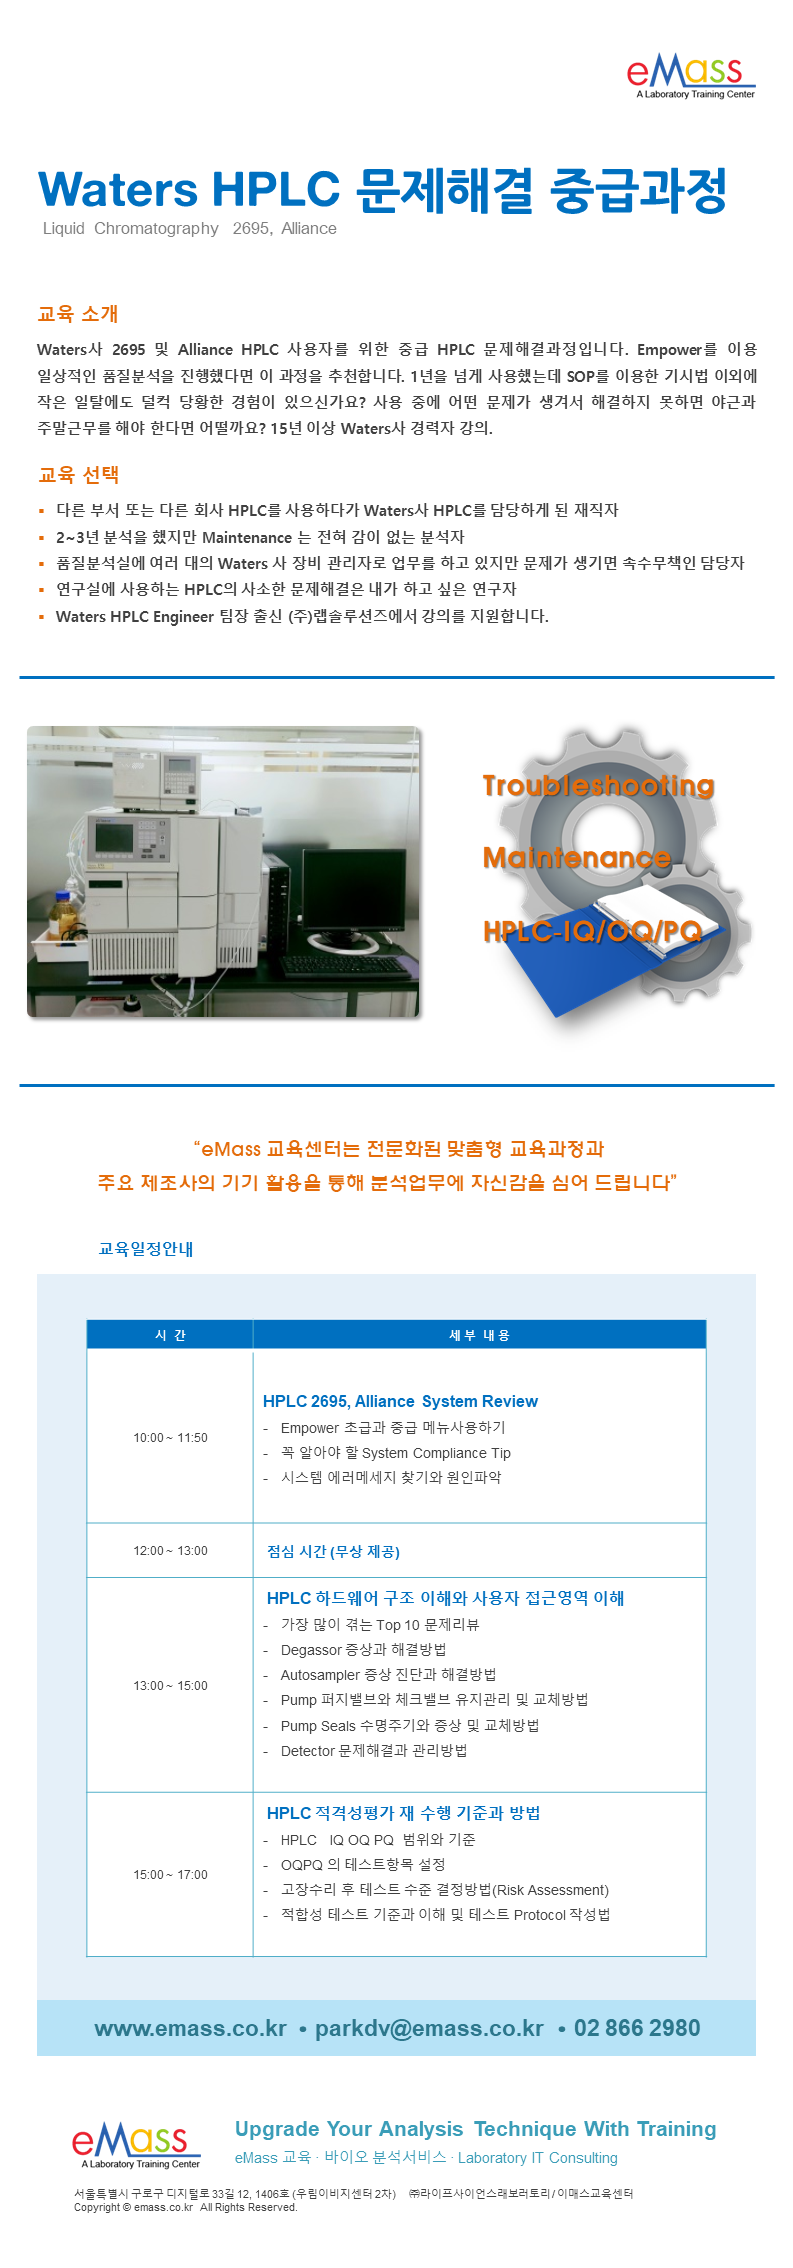 Waters HPLC 사용자 과정.png